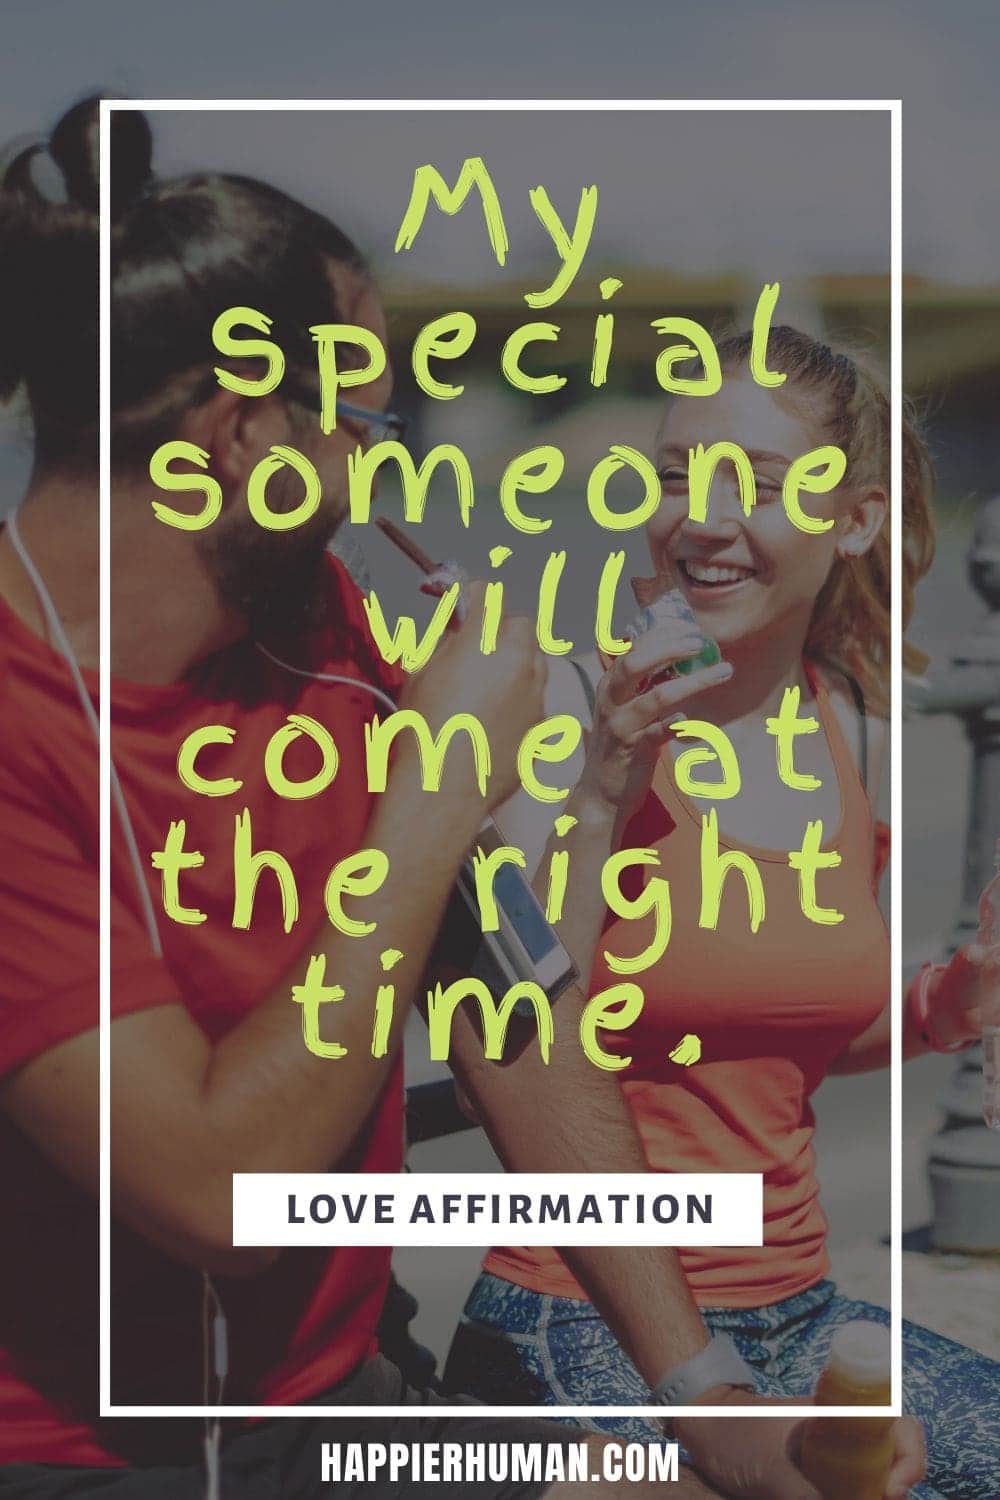 Affirmations to Attract Love - “My special someone will come at the right time.” | positive affirmations to bring love back | affirmations for love and healing | affirmations to attract soulmate #affirmationsdaily #affirmationstoactions #loveaffirmations